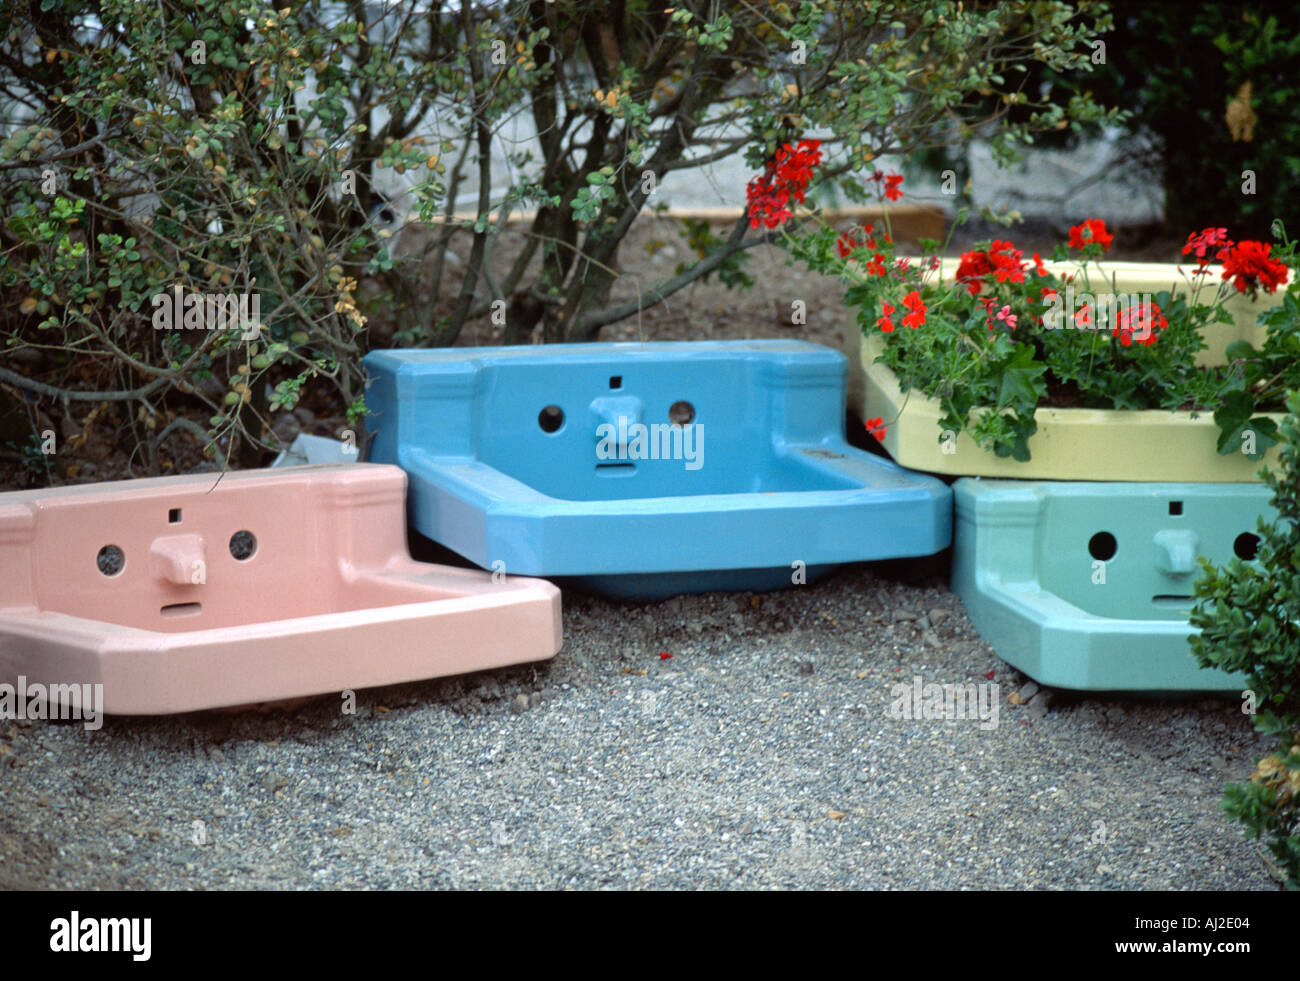 Four colorful vintage wash basins looking like faces of grumpy people recycled as decorative planters in a garden in Belgium Stock Photo